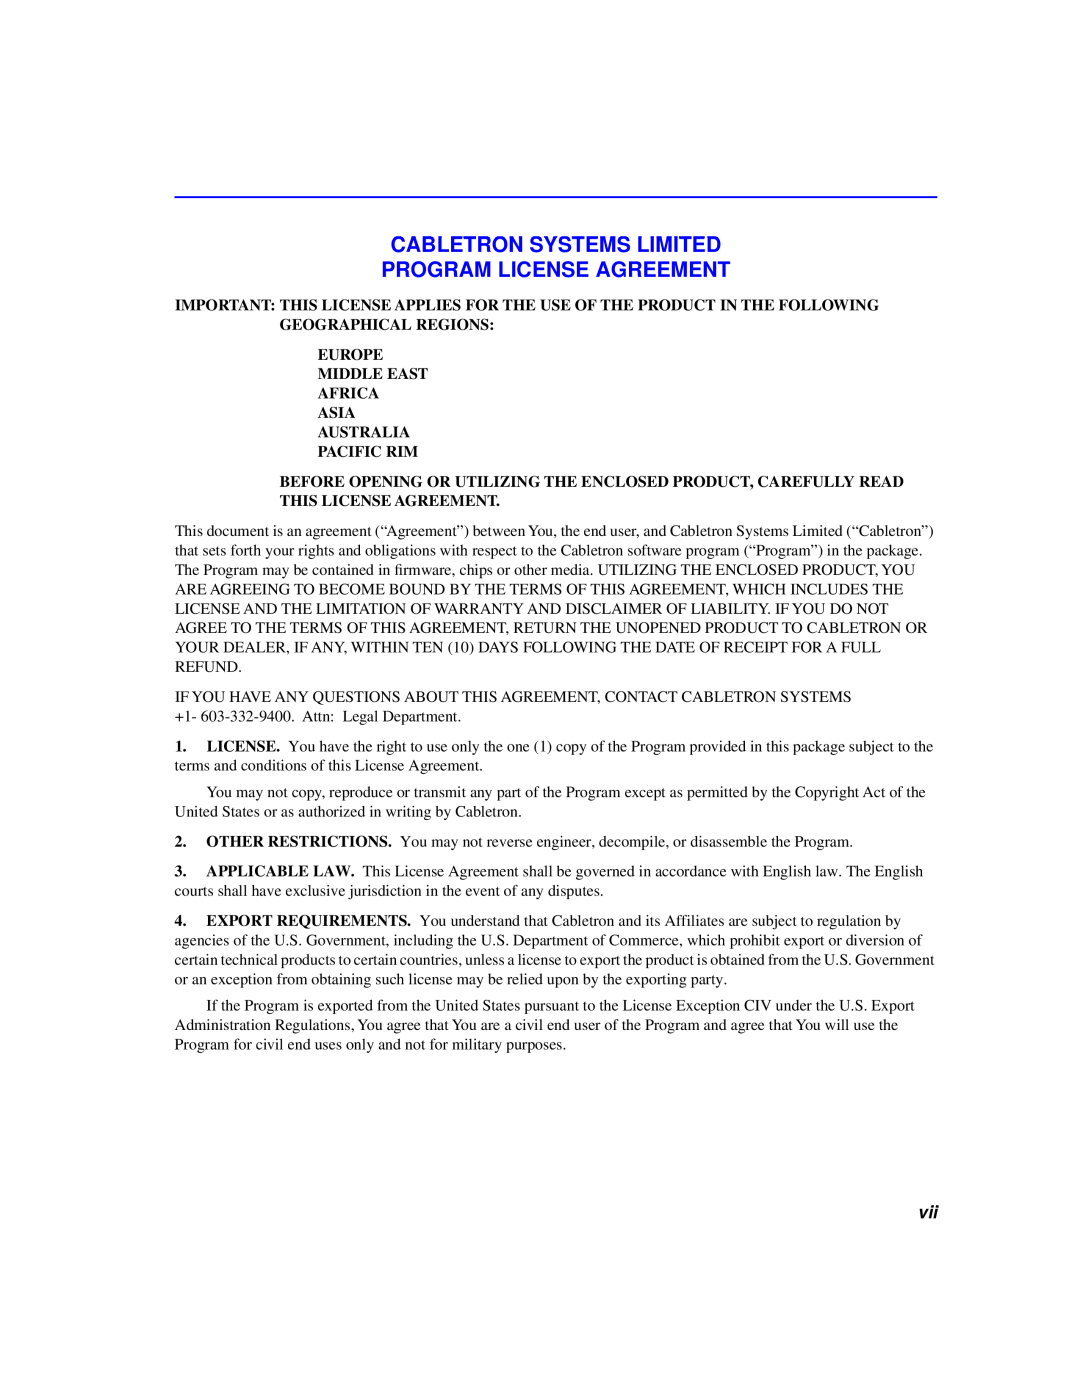 Cabletron Systems 2H253-25R manual Cabletron Systems Limited Program License Agreement 